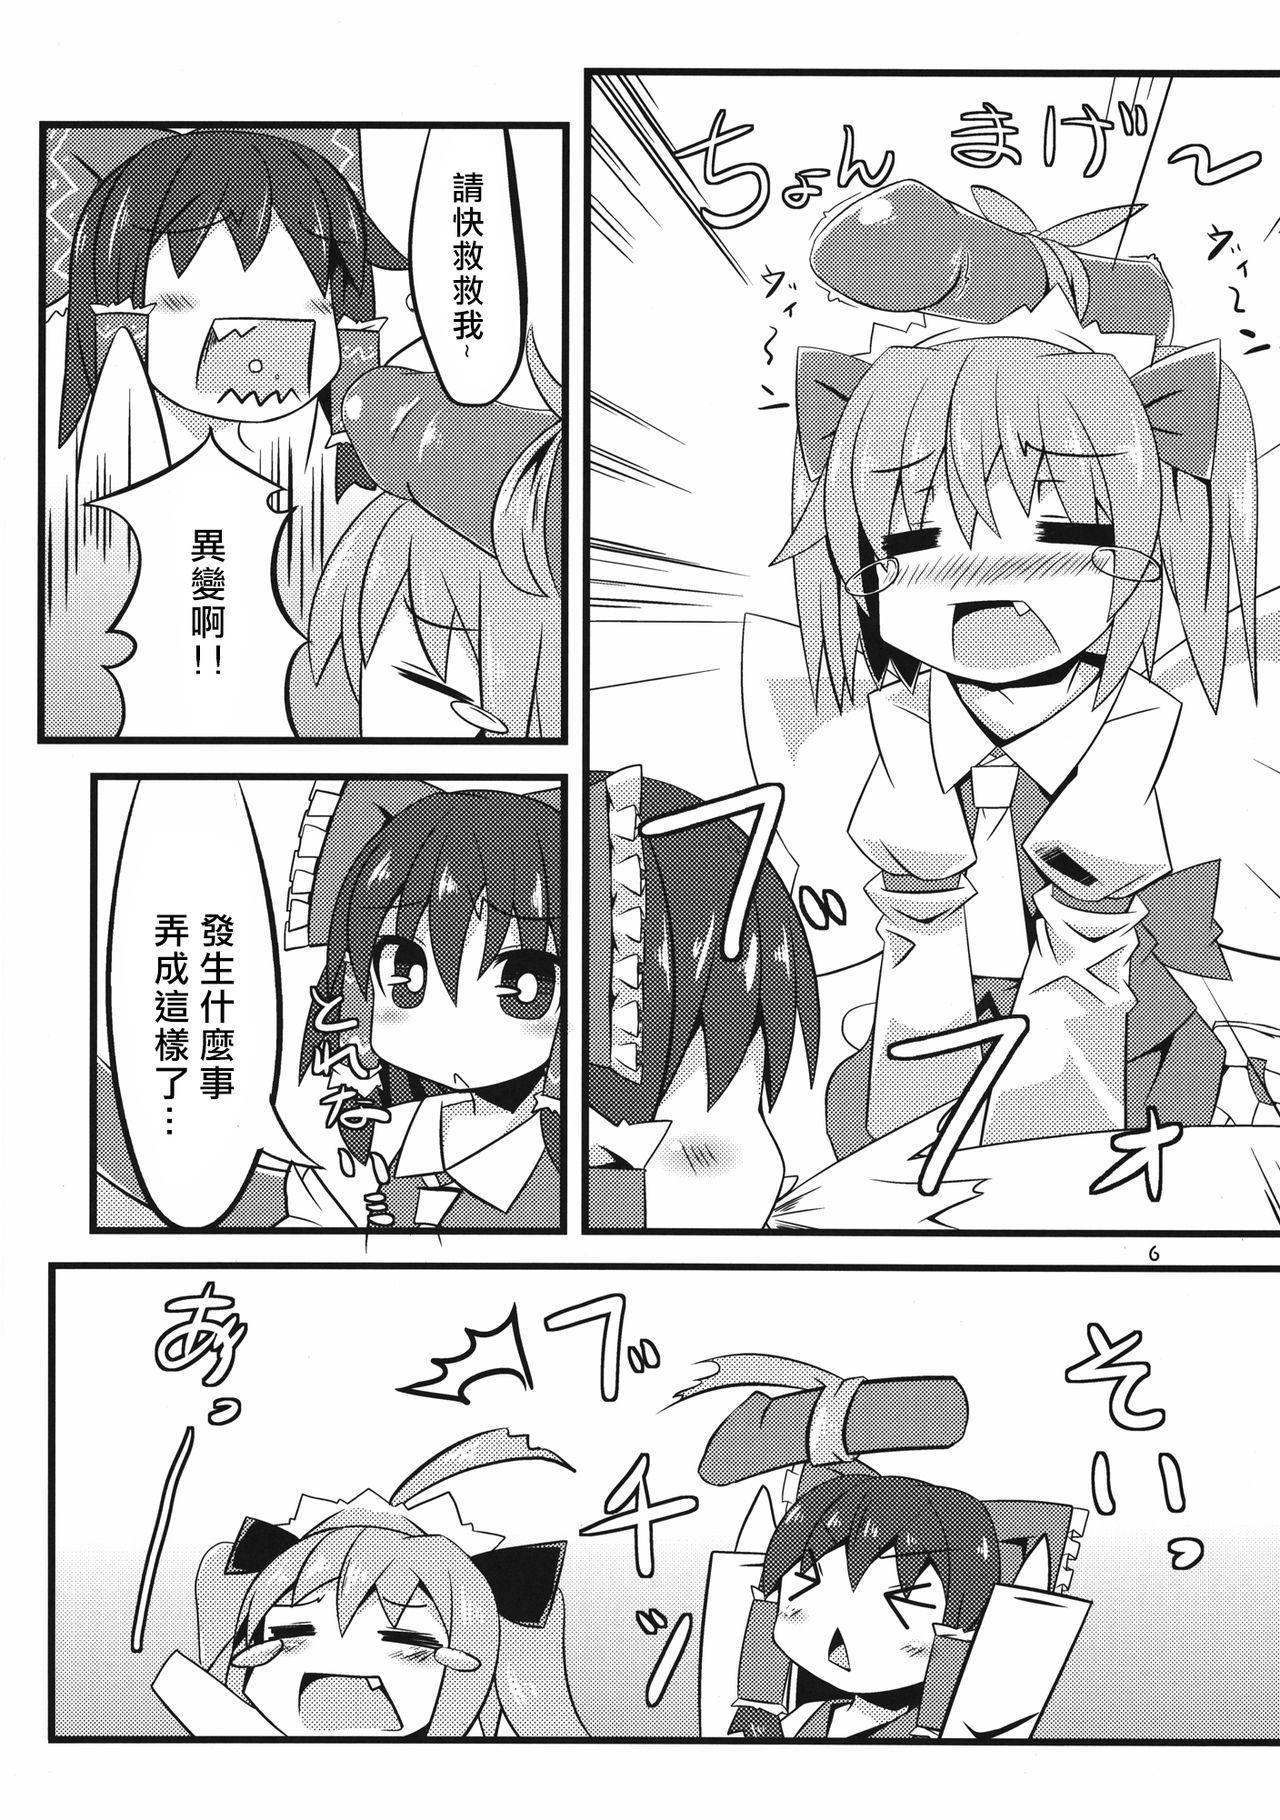 Babes Flan-chan to Asobo!! - Touhou project Her - Page 6